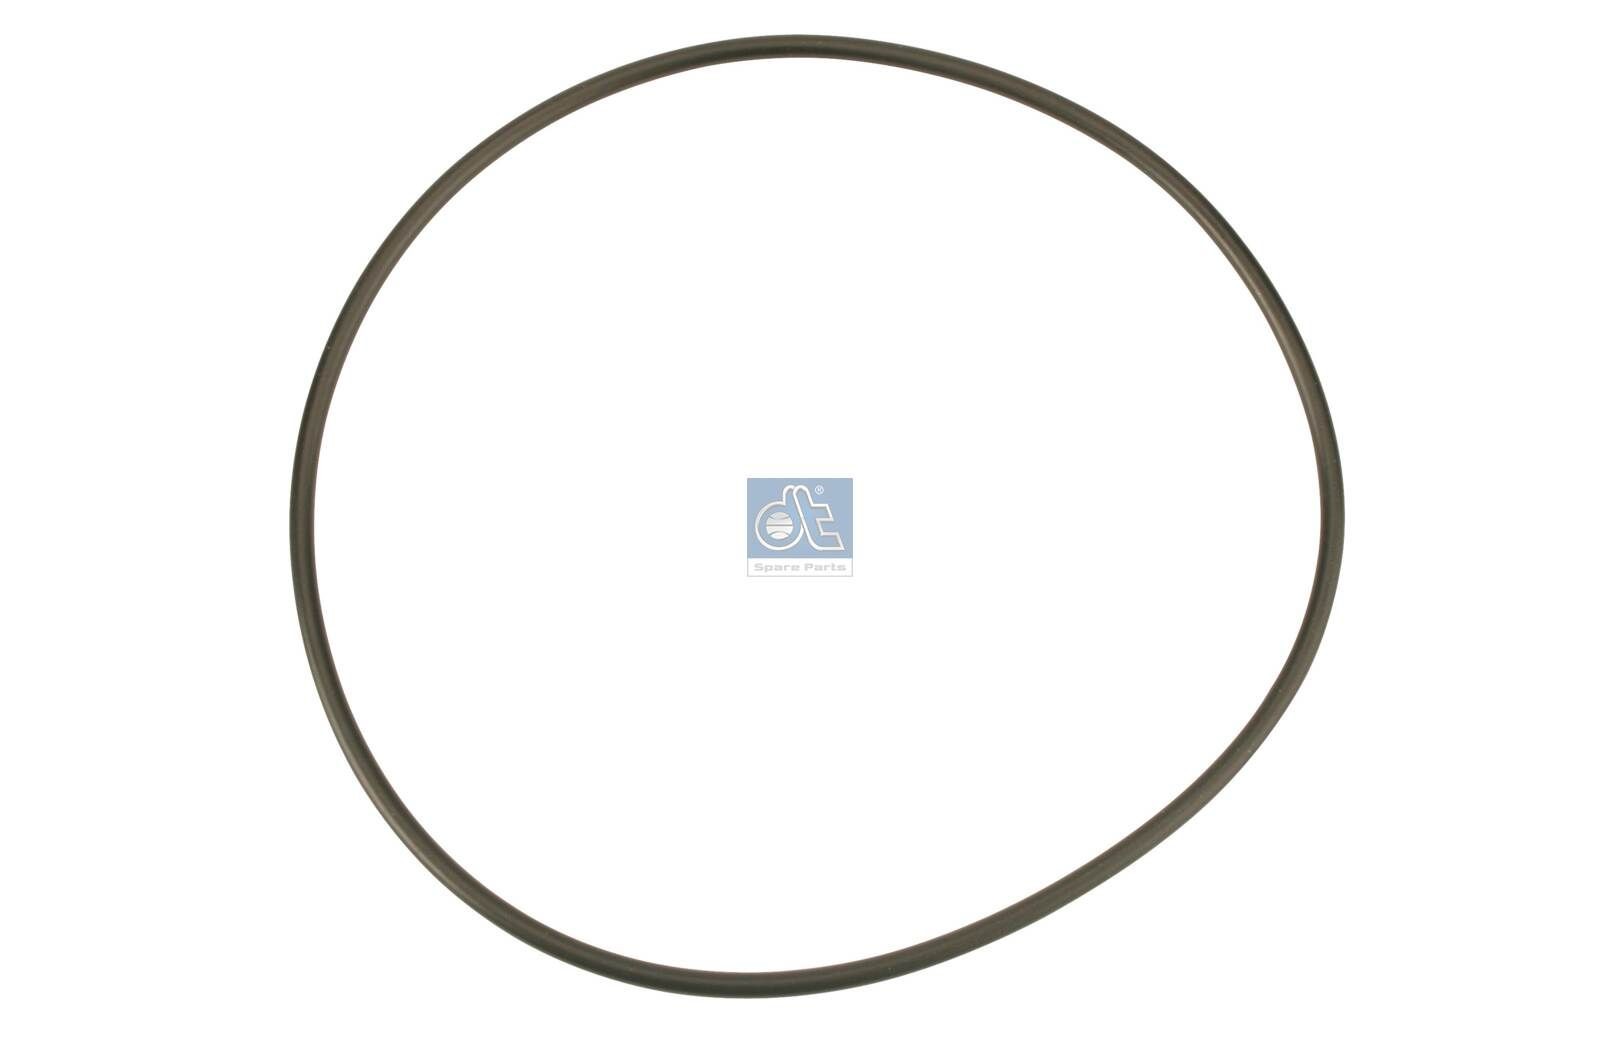 DT Spare Parts 130 x 3,5 mm, O-Ring, NBR (nitrile butadiene rubber) Seal Ring 5.41105 buy